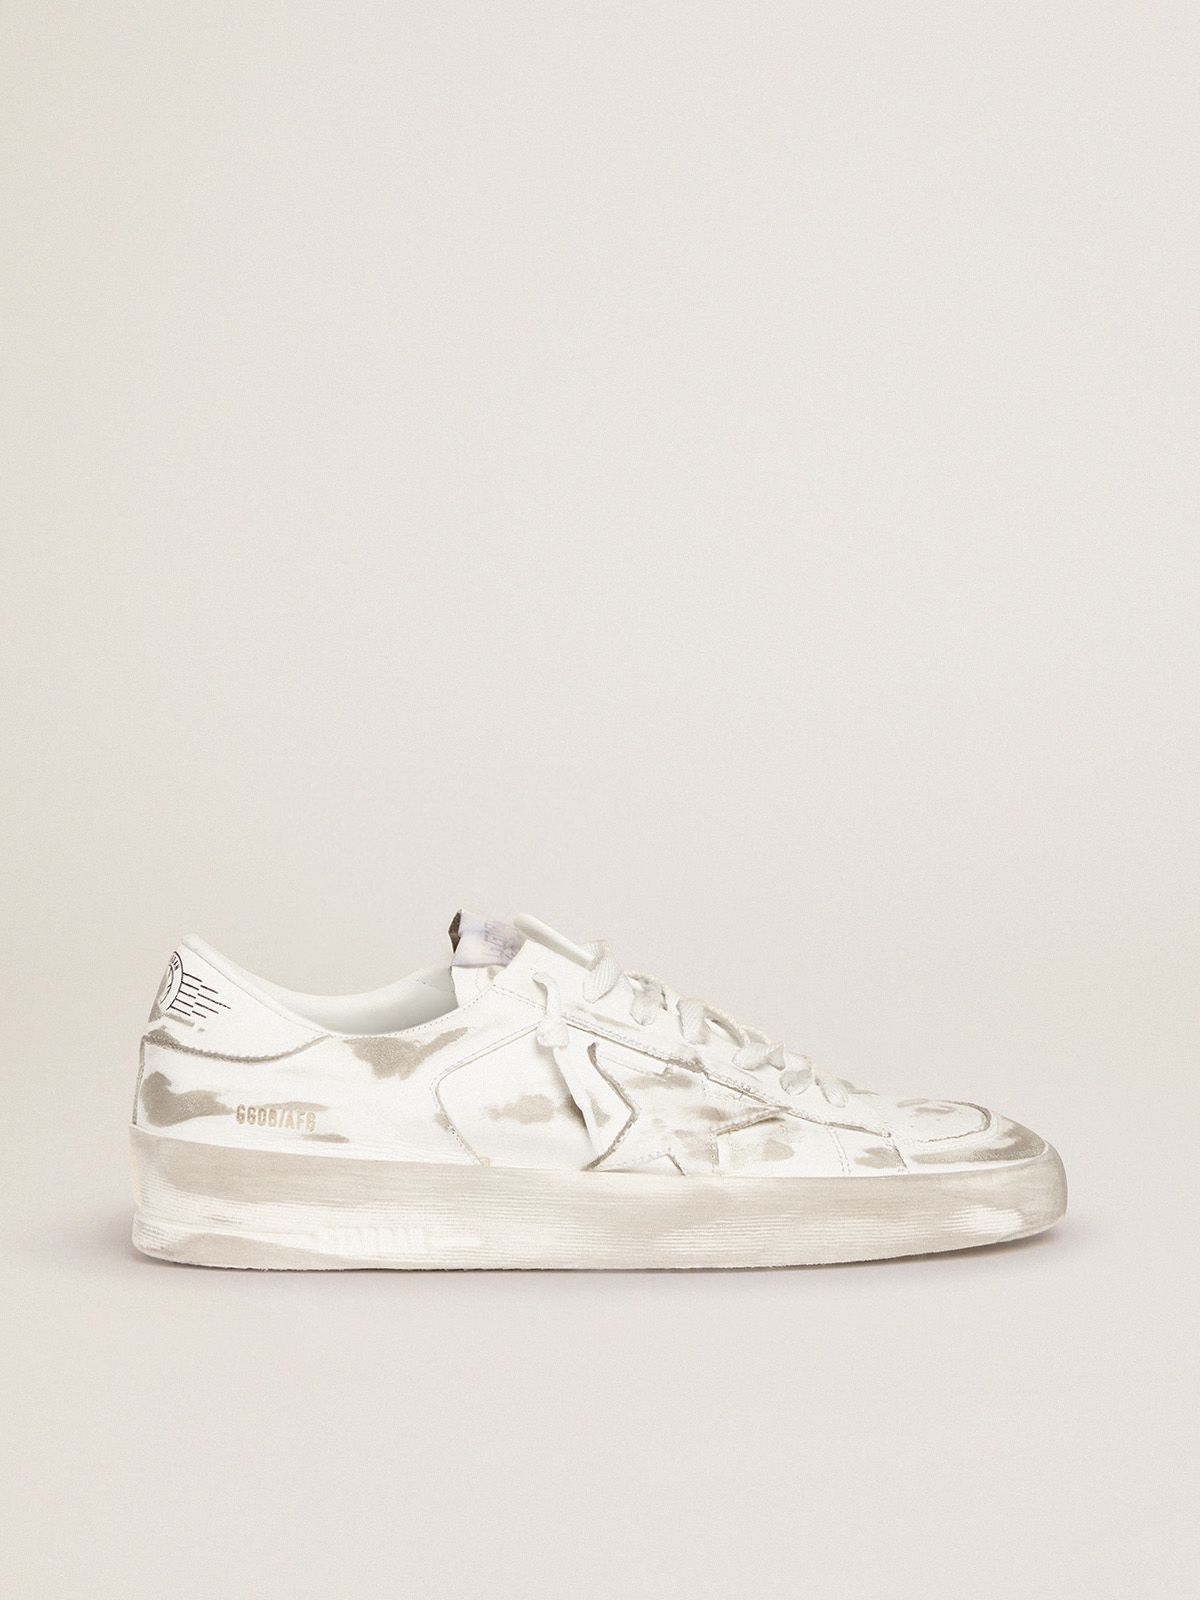 golden goose Stardan white with lived-in treatment sneakers leather in